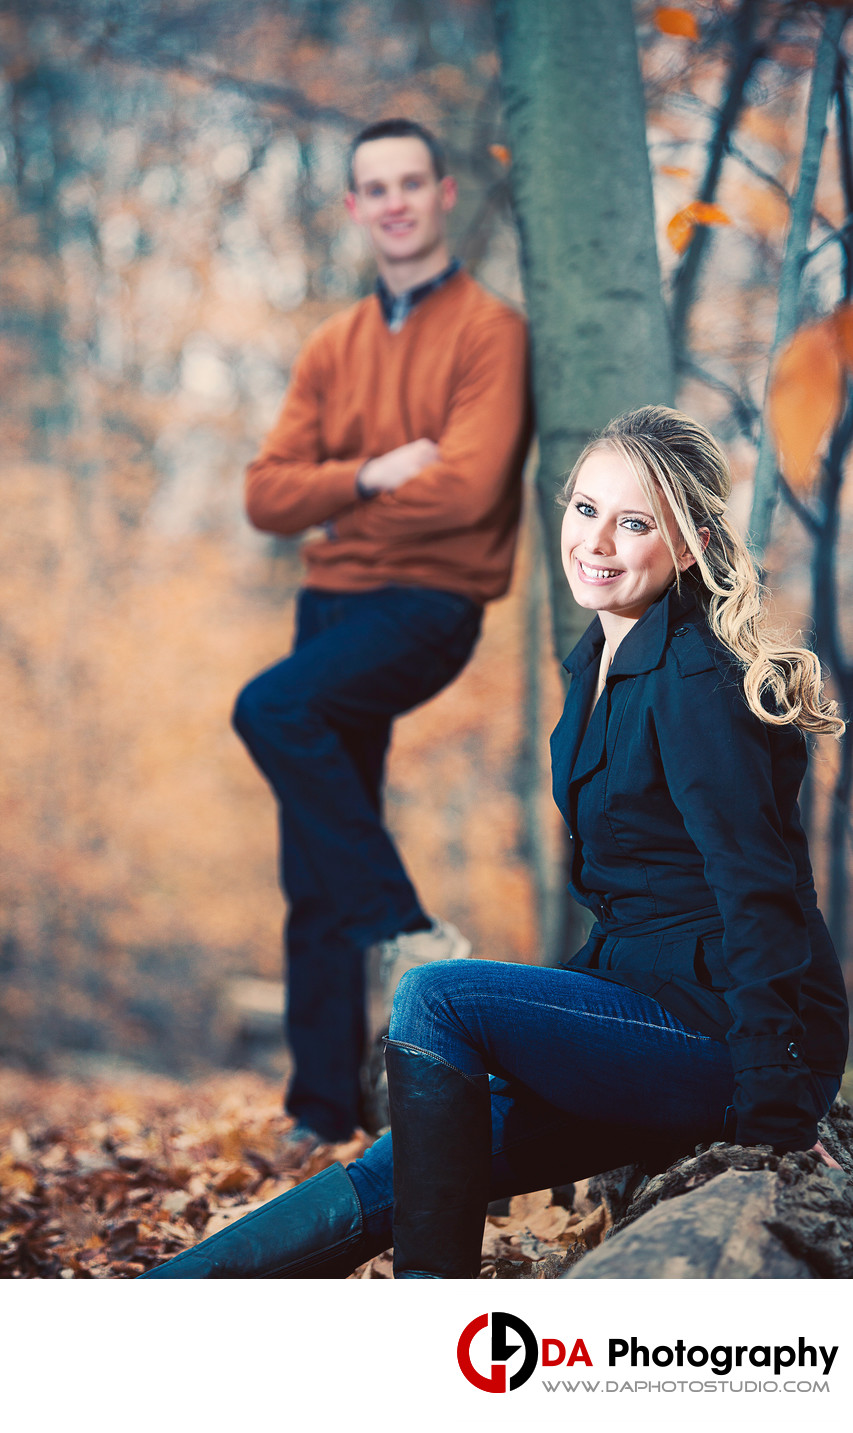 Engagement Photography at Centennial Park in Miton